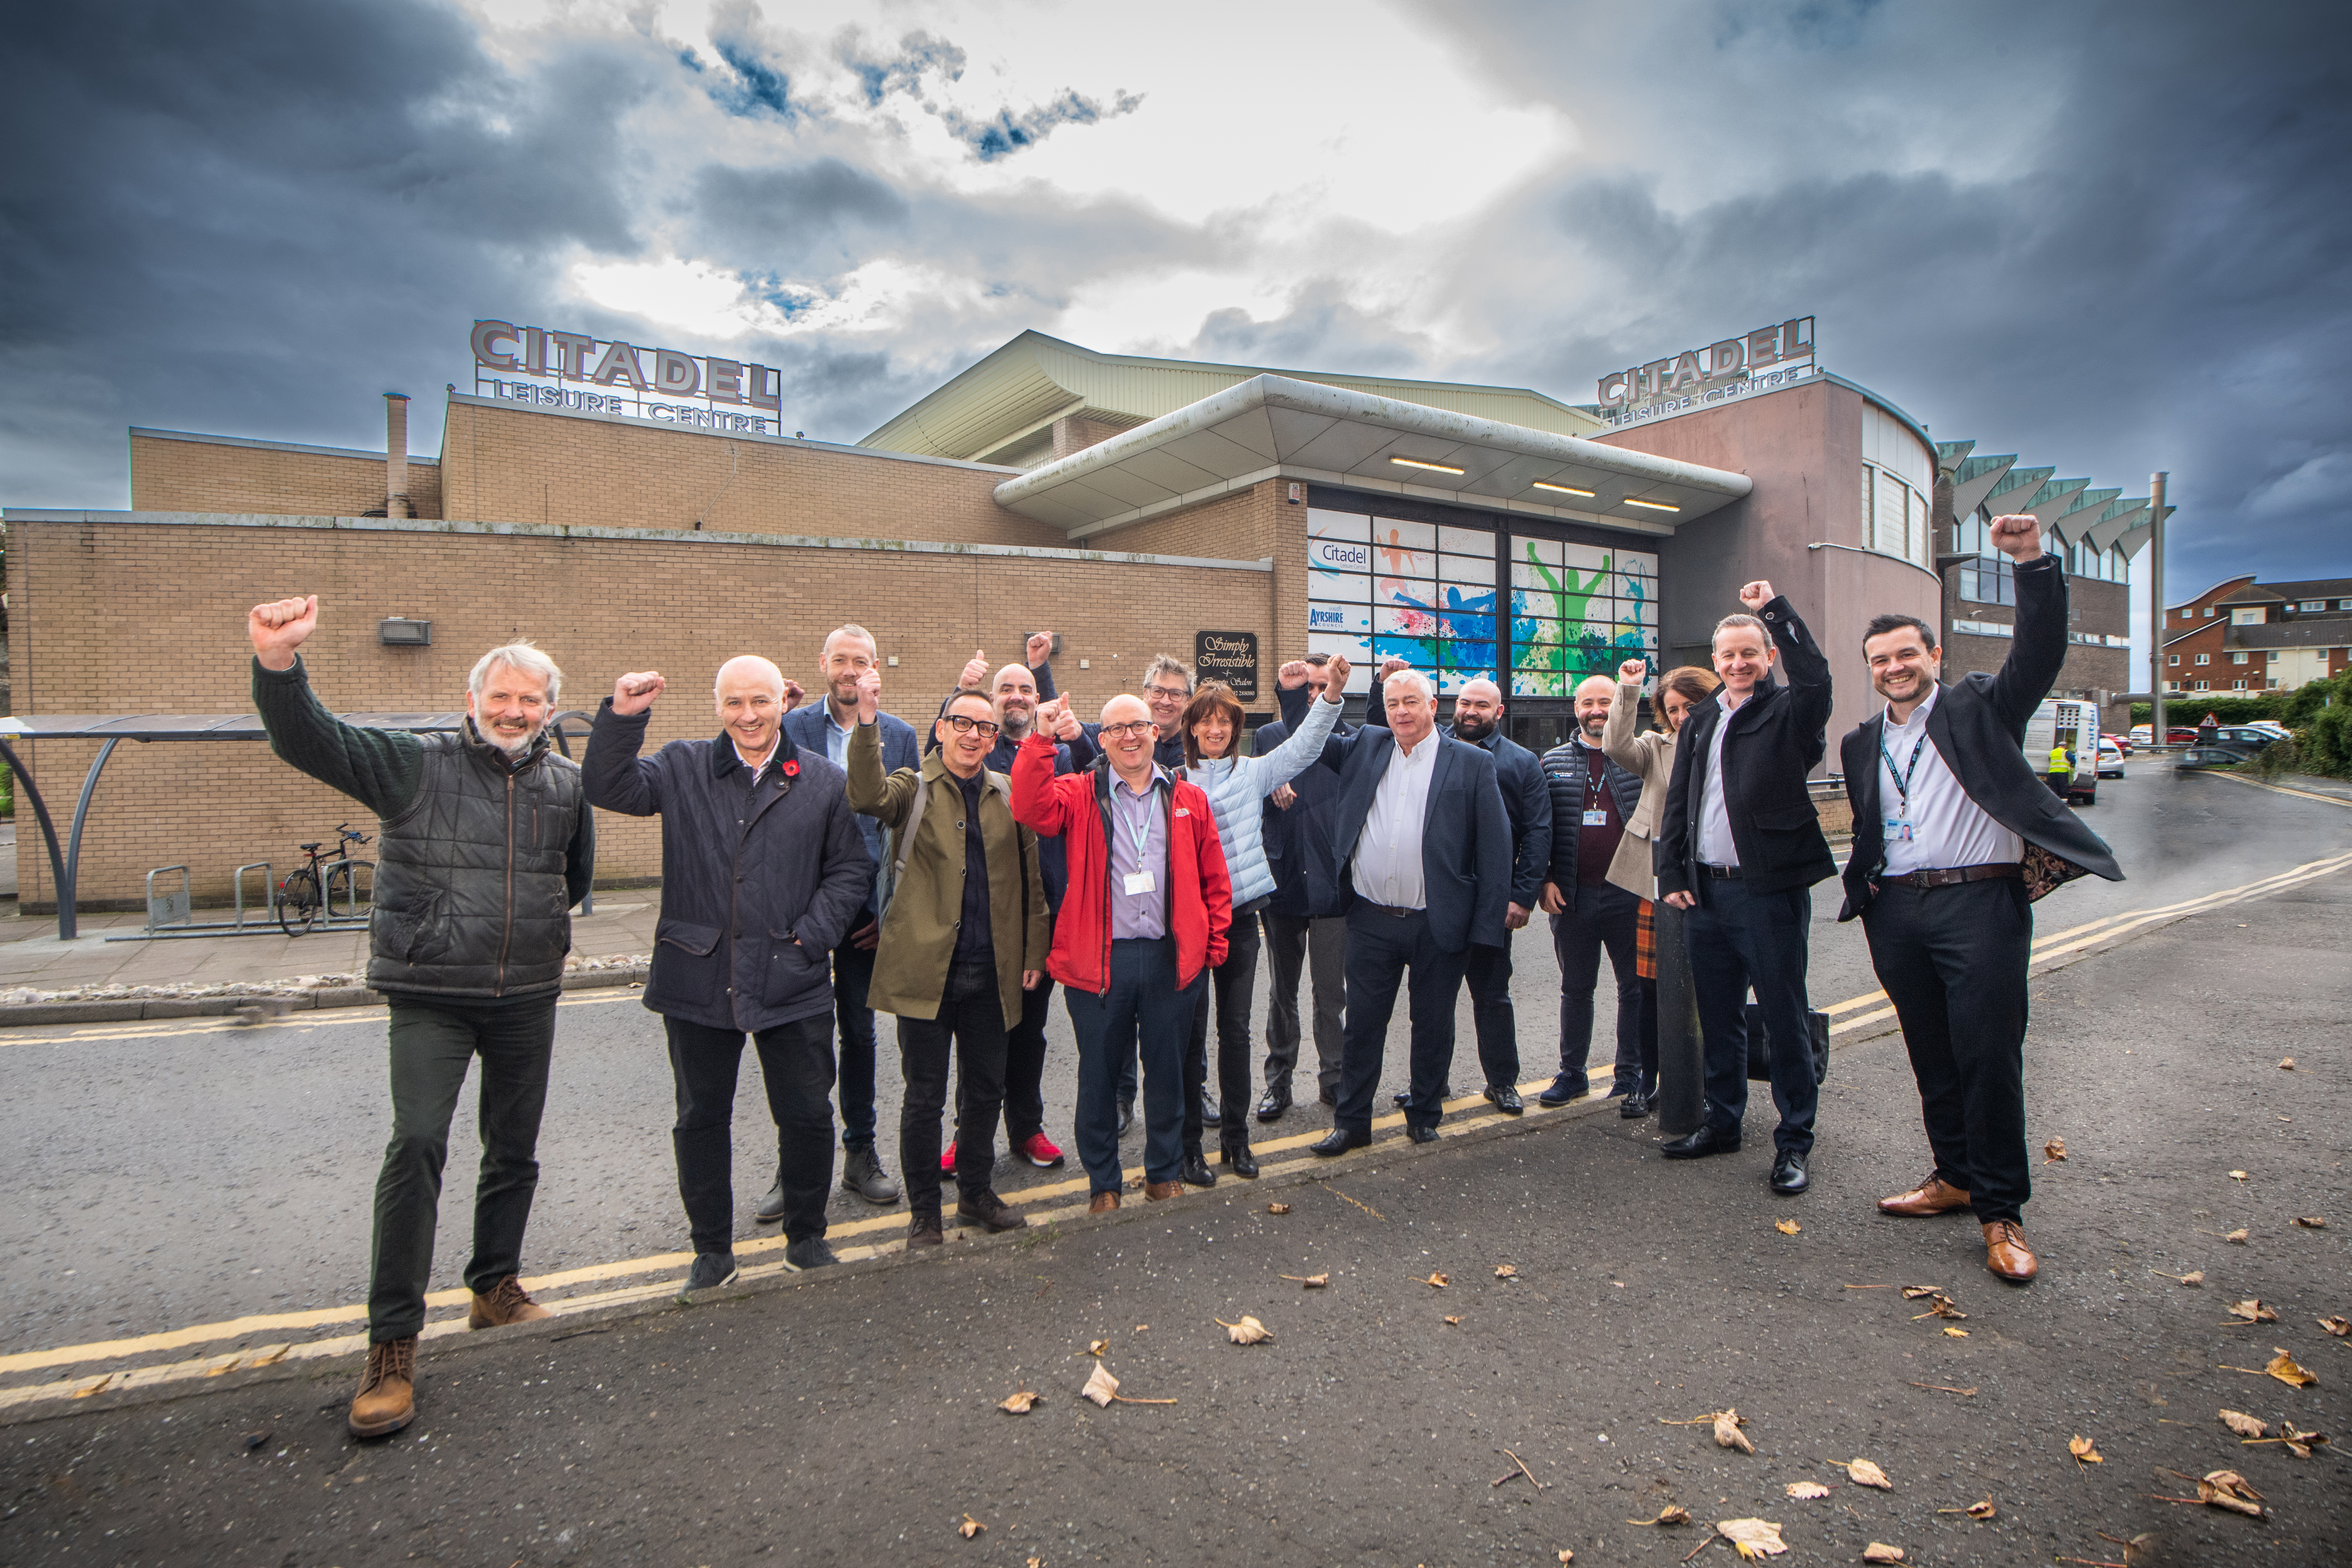 Robertson, Alliance Leisure and Holmes Miller appointed to £10m Citadel Leisure Centre revamp